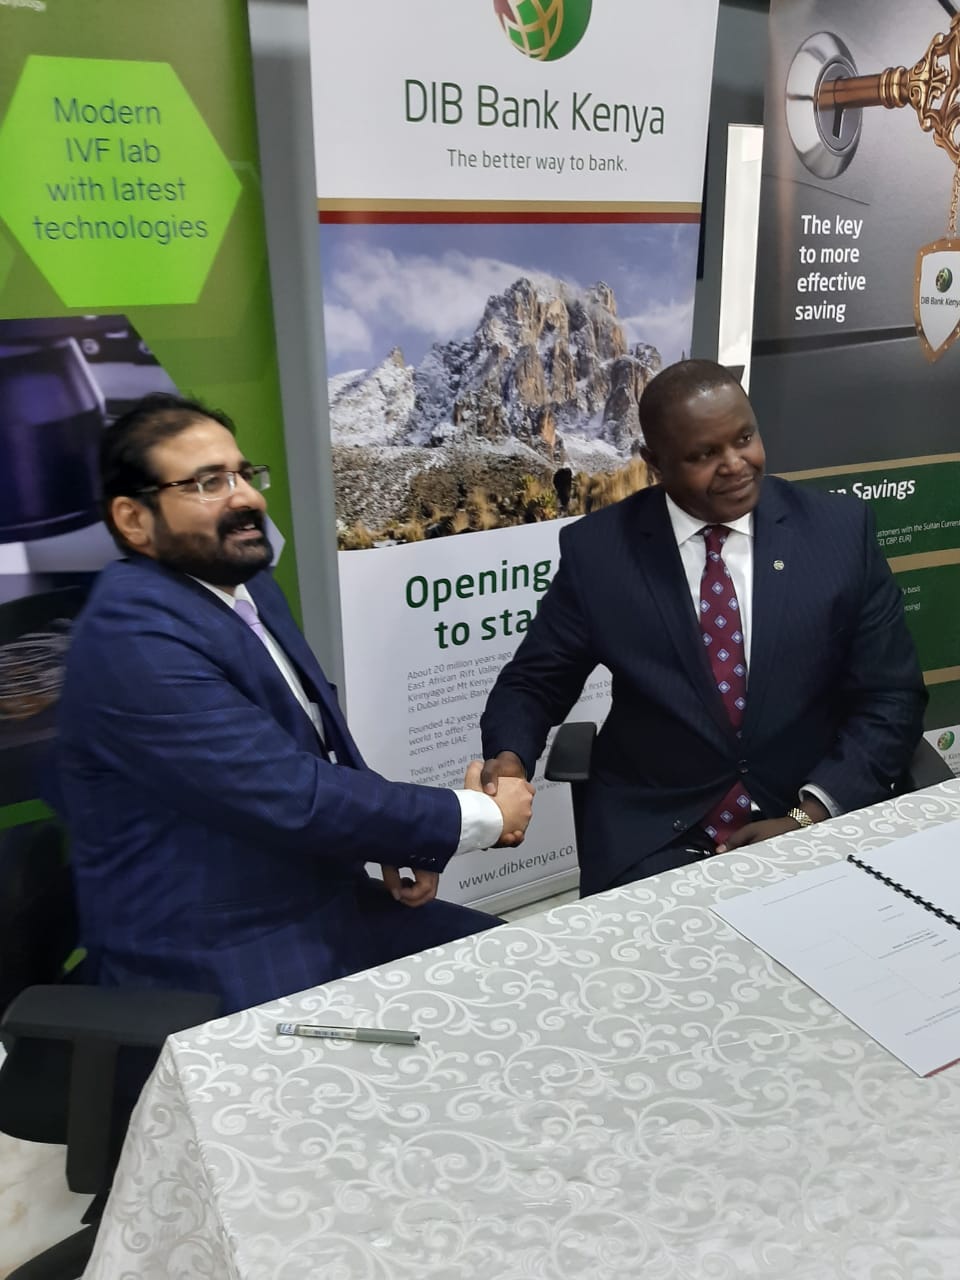 NMC Fertility centre's Atul Dureja (left) shakes hands with DIB Bank's Peter Makau after signing the partnership. www.businesstoday.co.ke